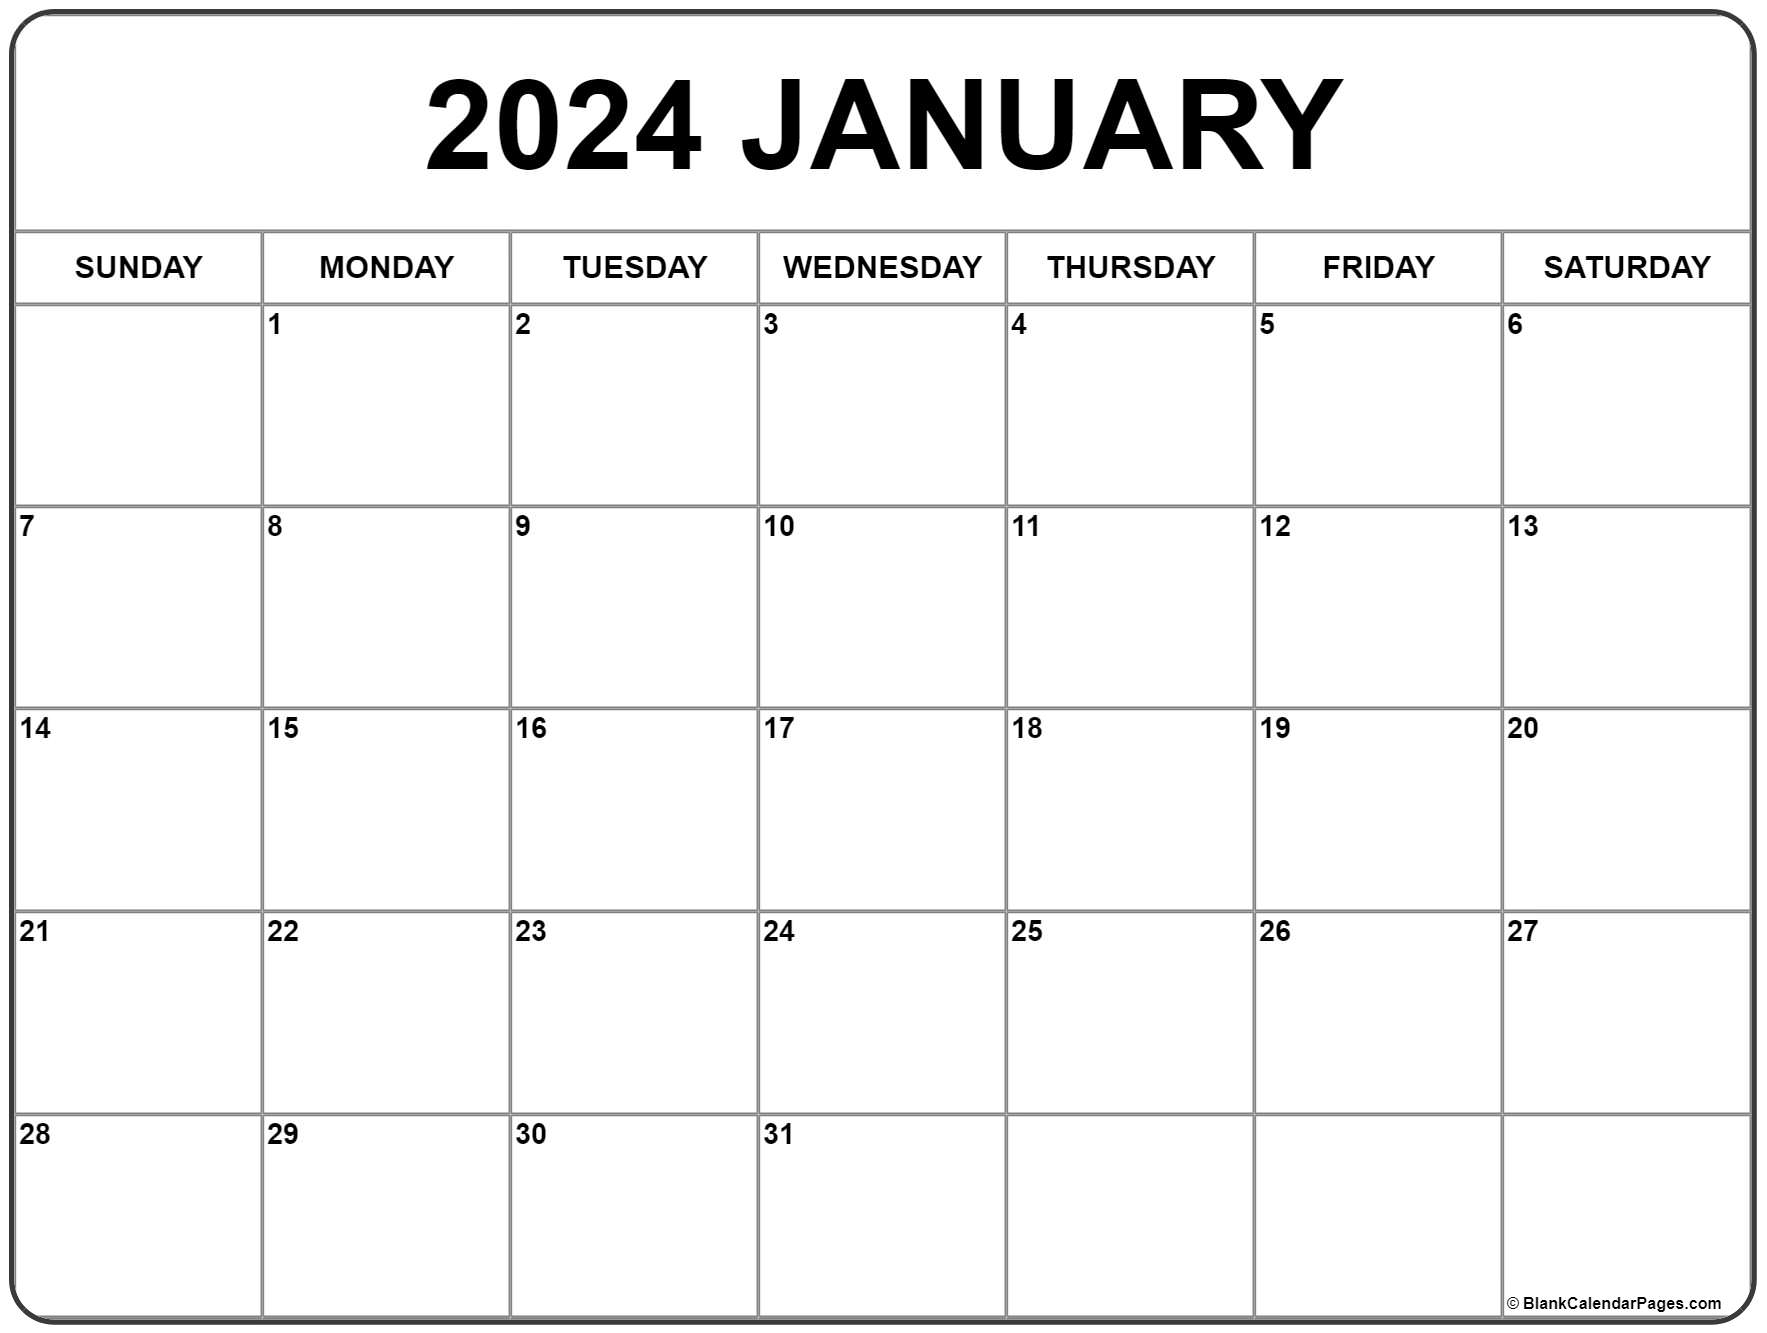 Calender Of Jan 2024 Audra Candide